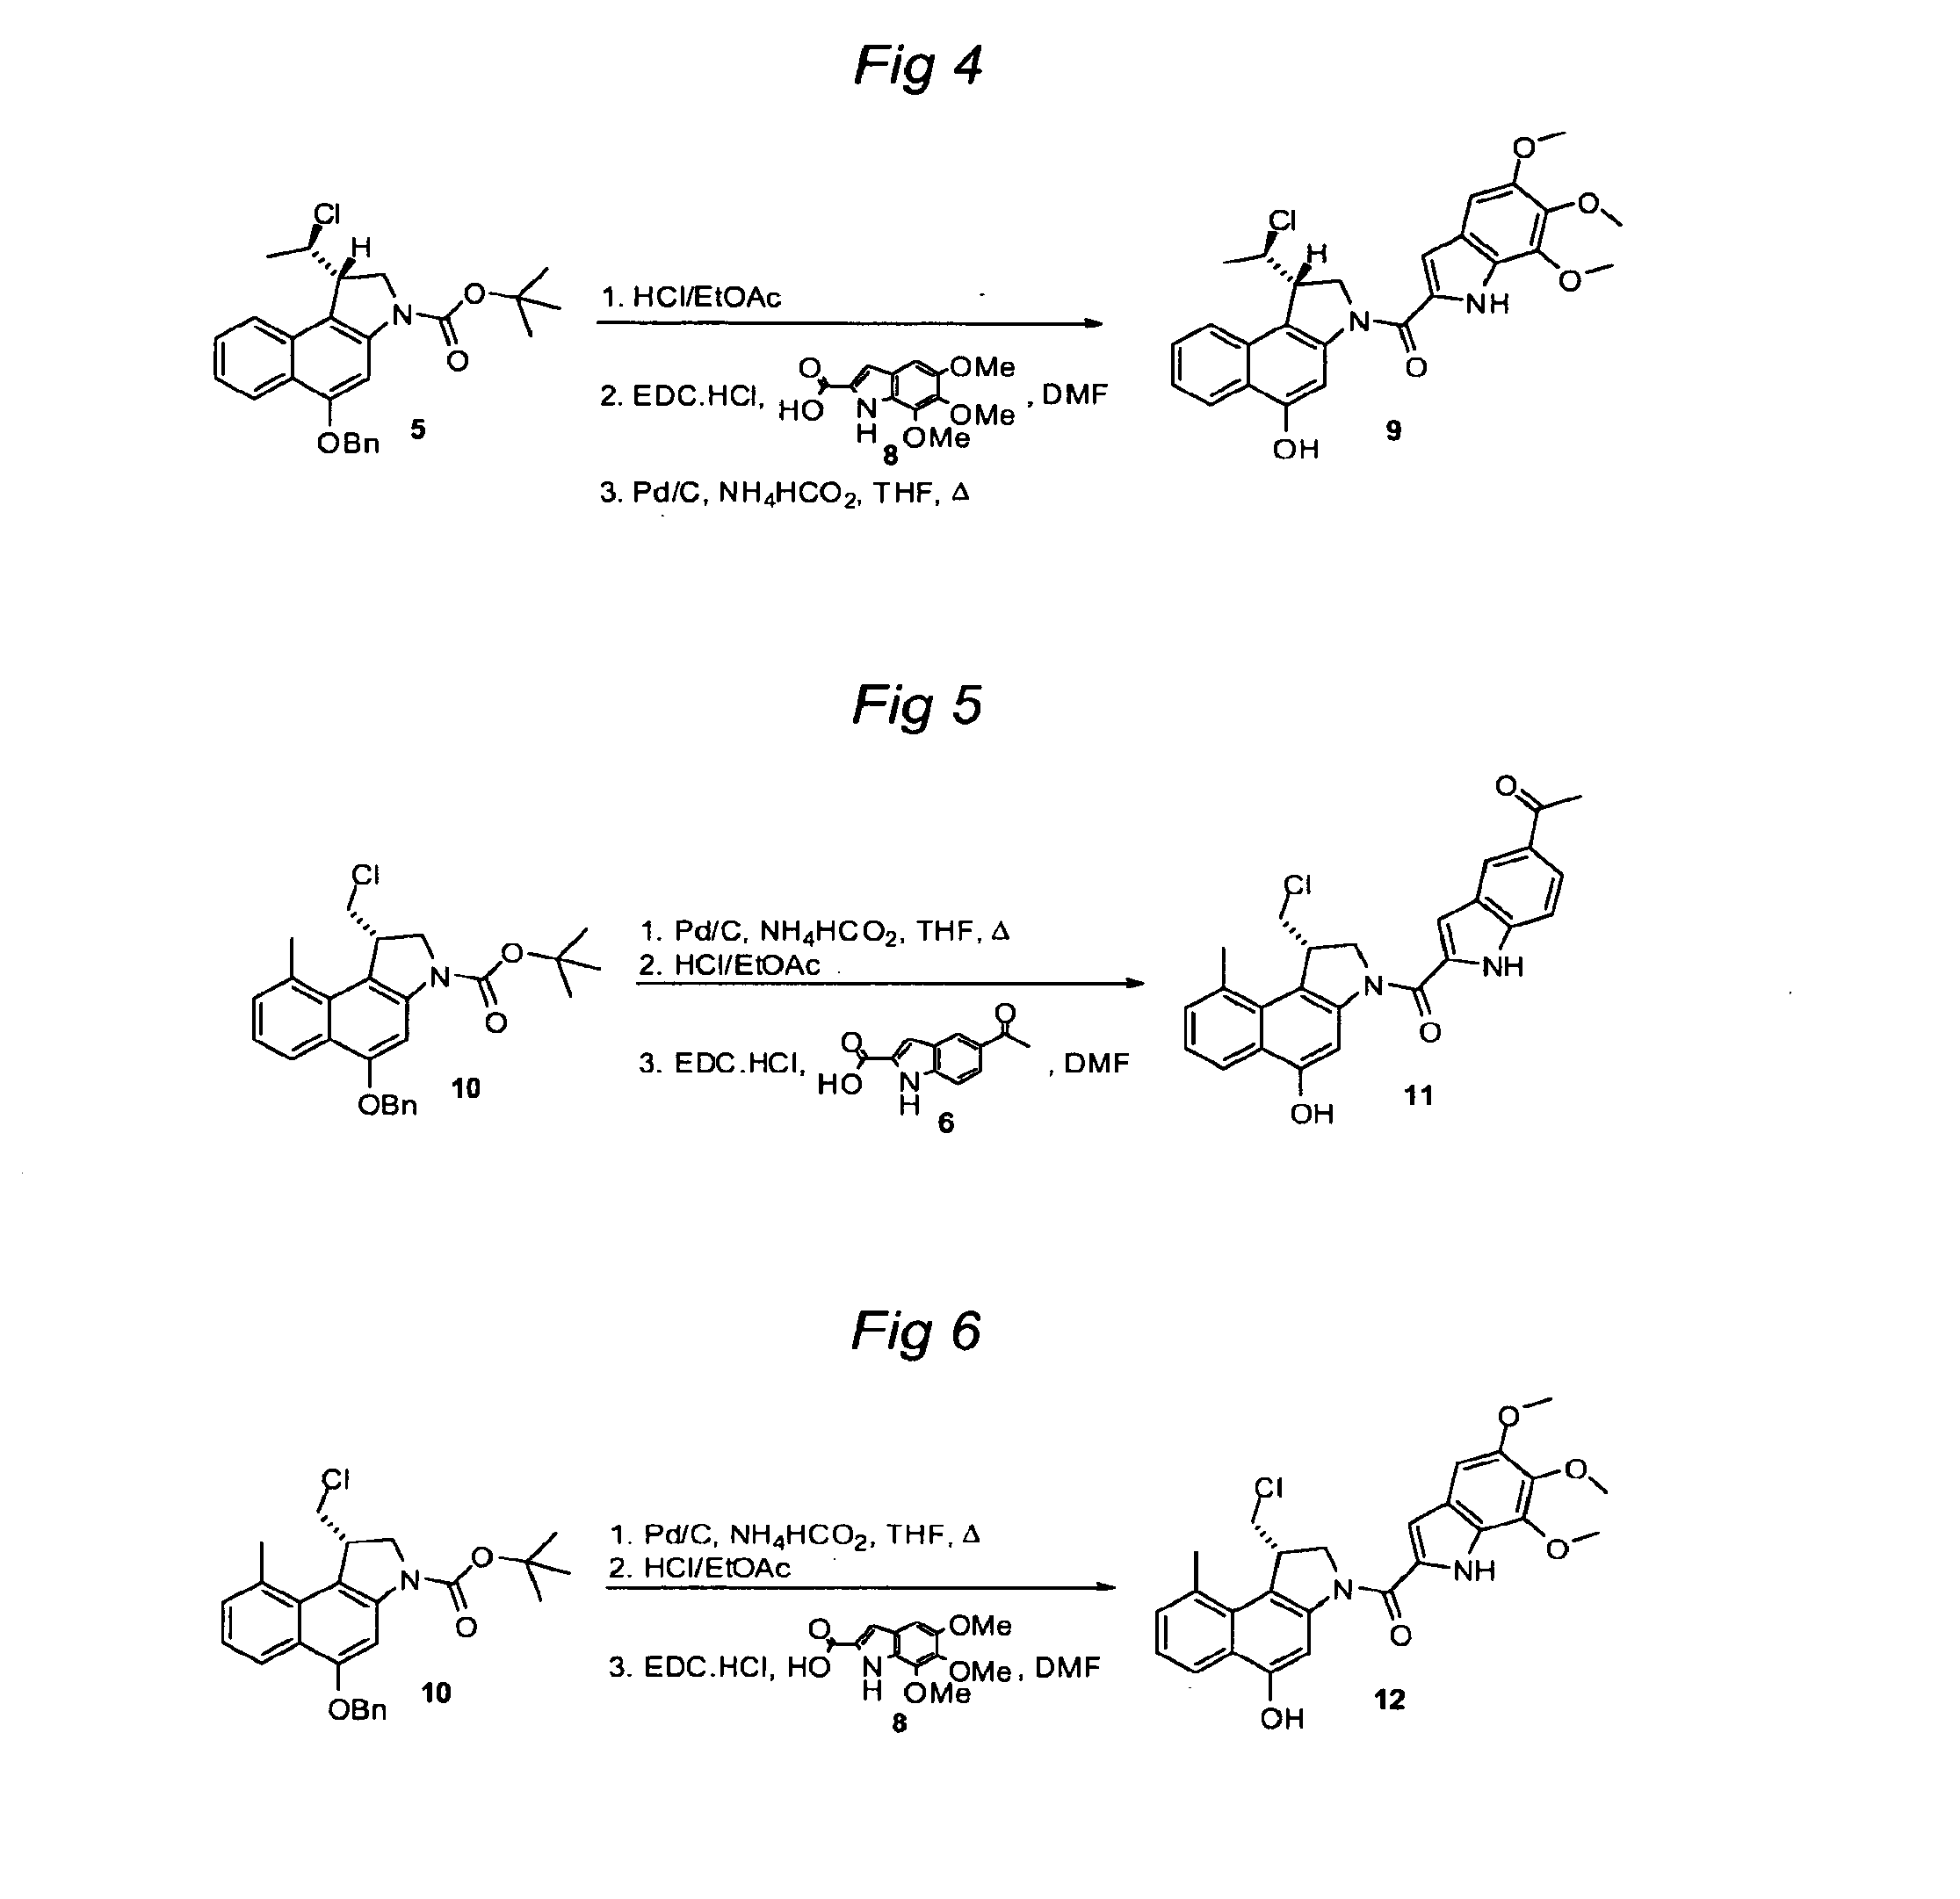 Substituted cc-1065 analogs and their conjugates